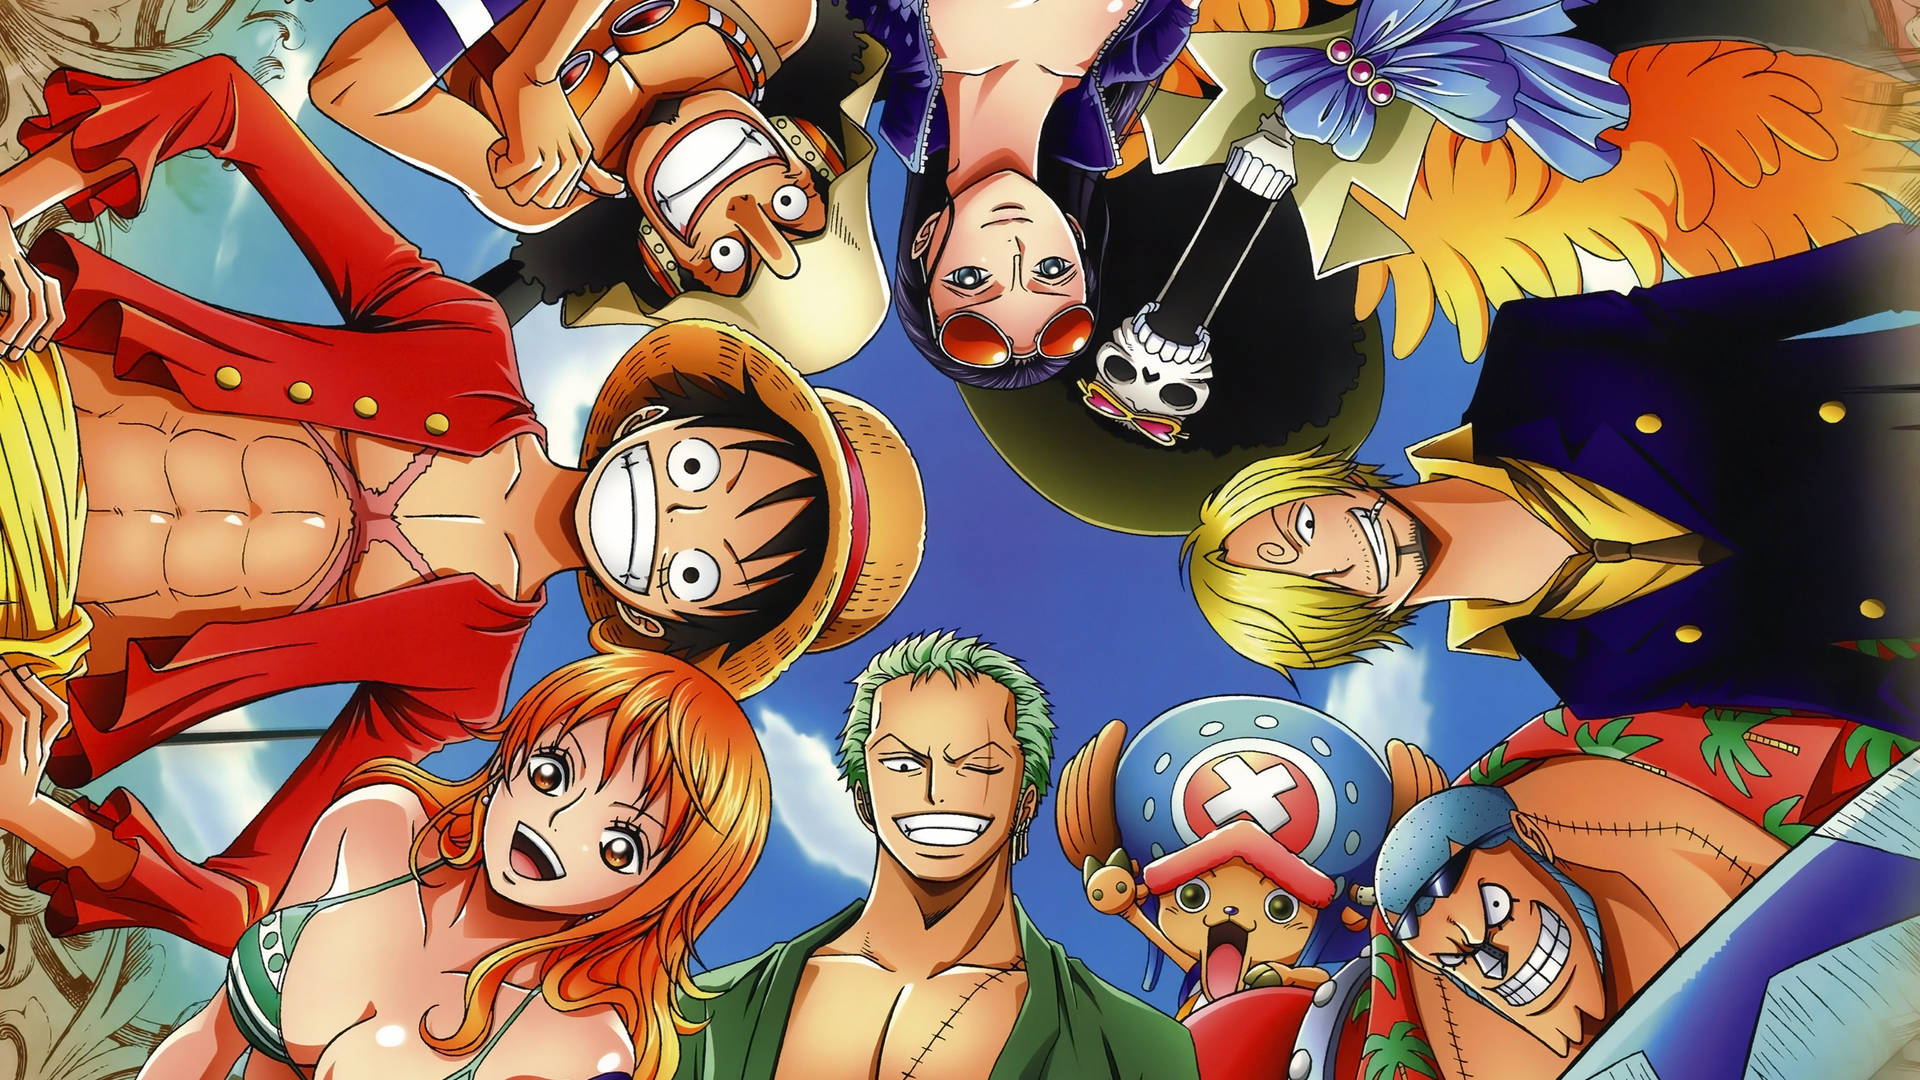 200+] One Piece Desktop Wallpapers for FREE 